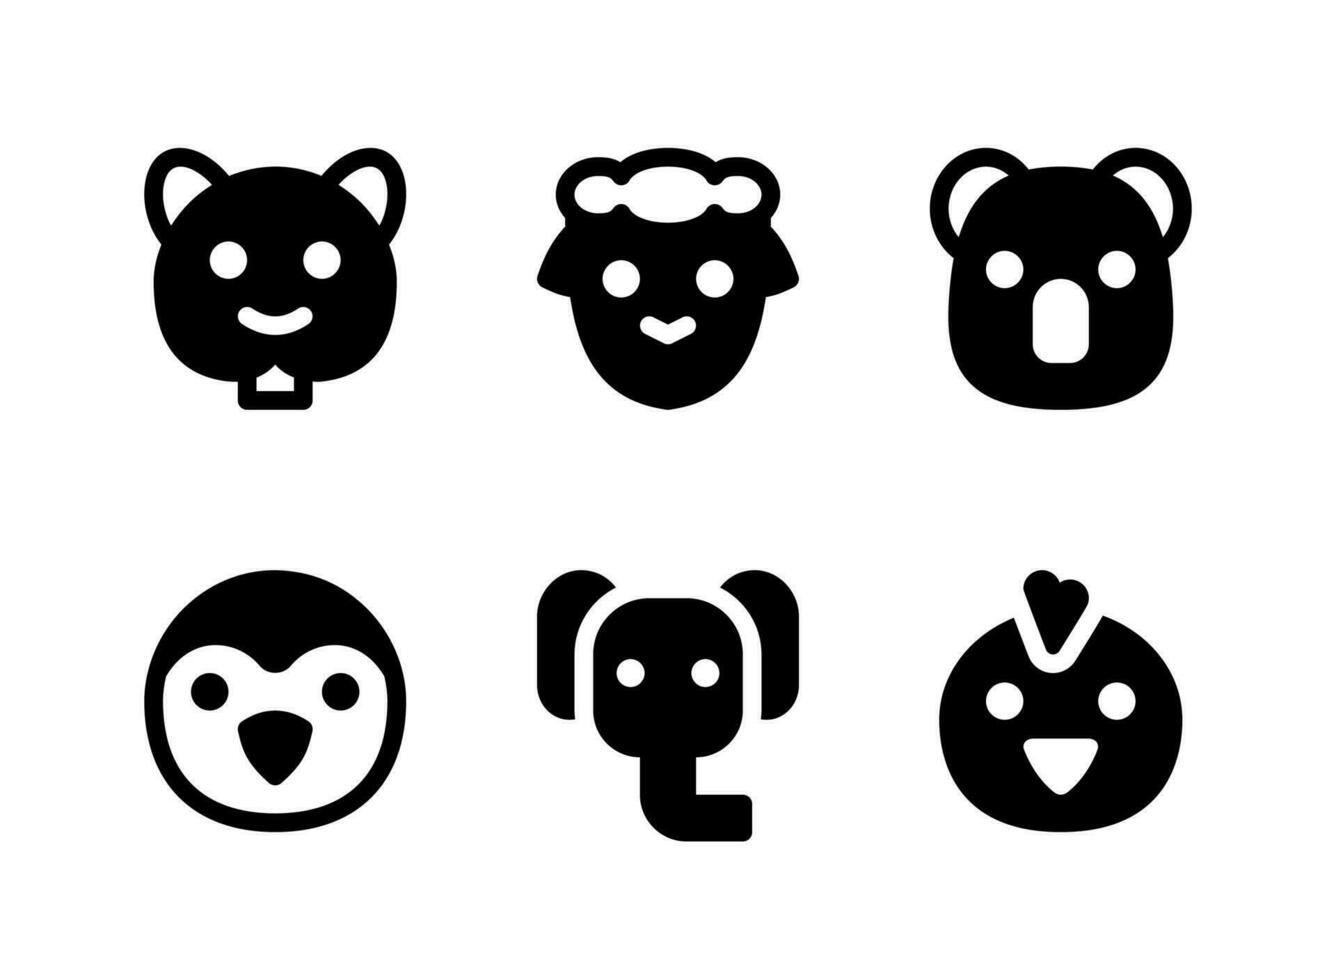 Simple Set of Animal Related Vector Solid Icons. Contains Icons as Koala, Penguin, Elephant, Chick and more.